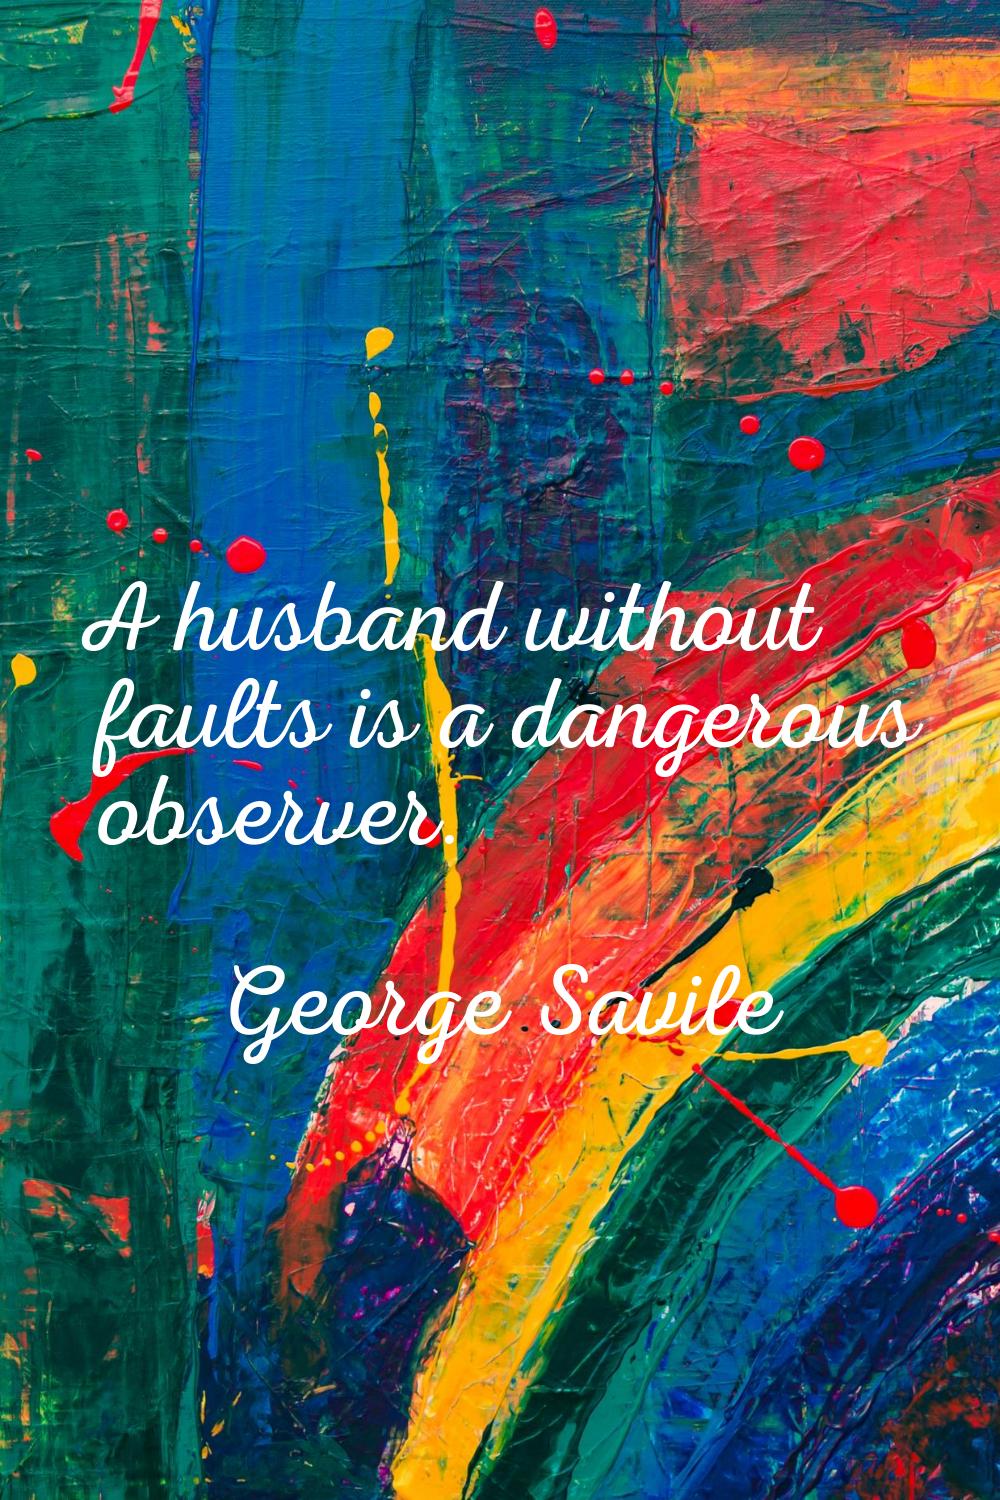 A husband without faults is a dangerous observer.